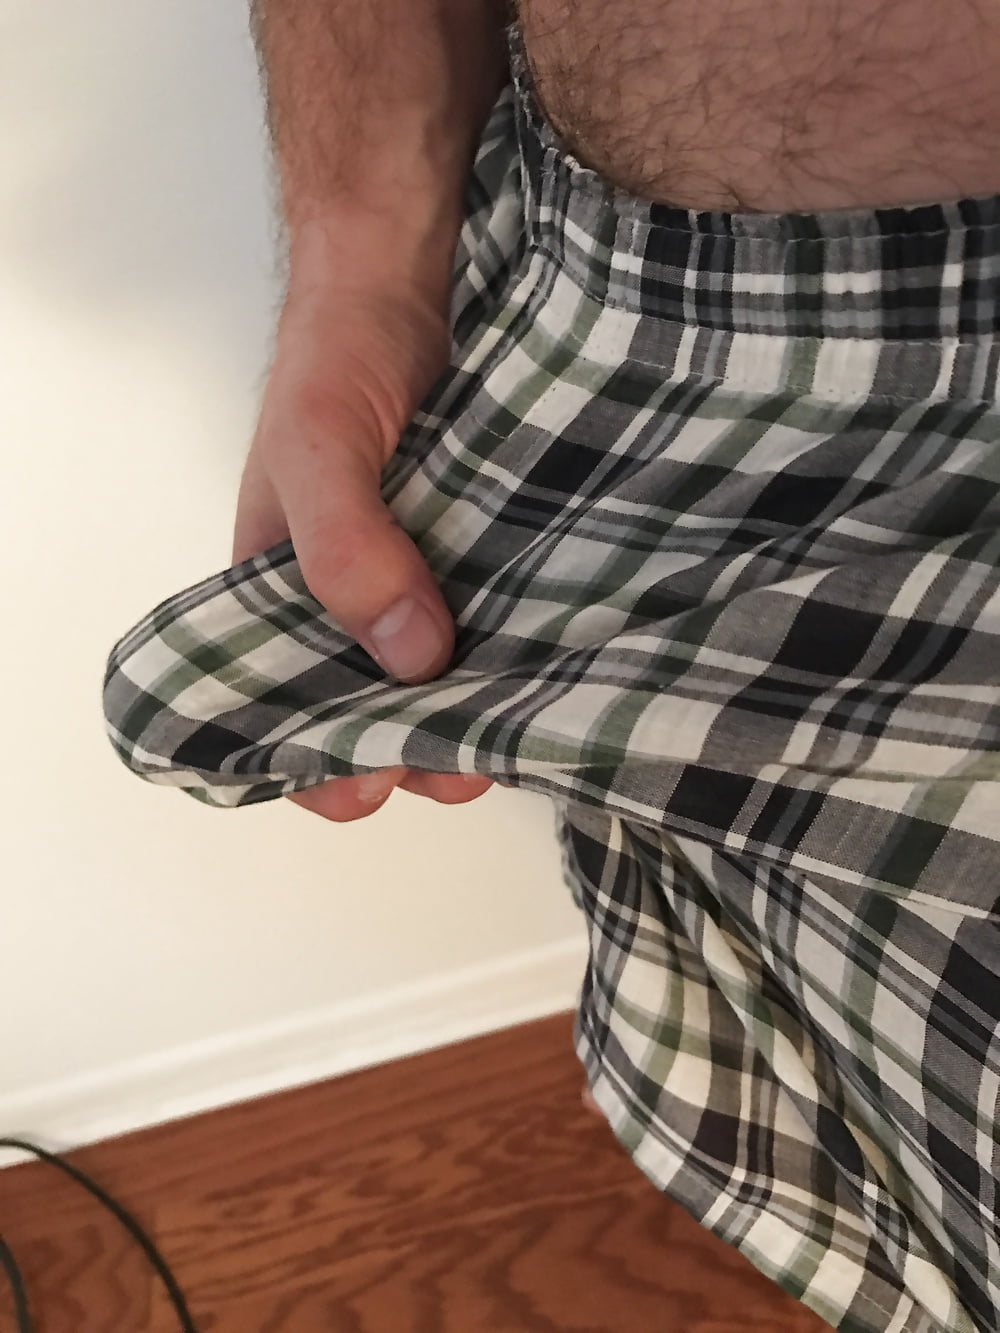 Hard cock in boxers